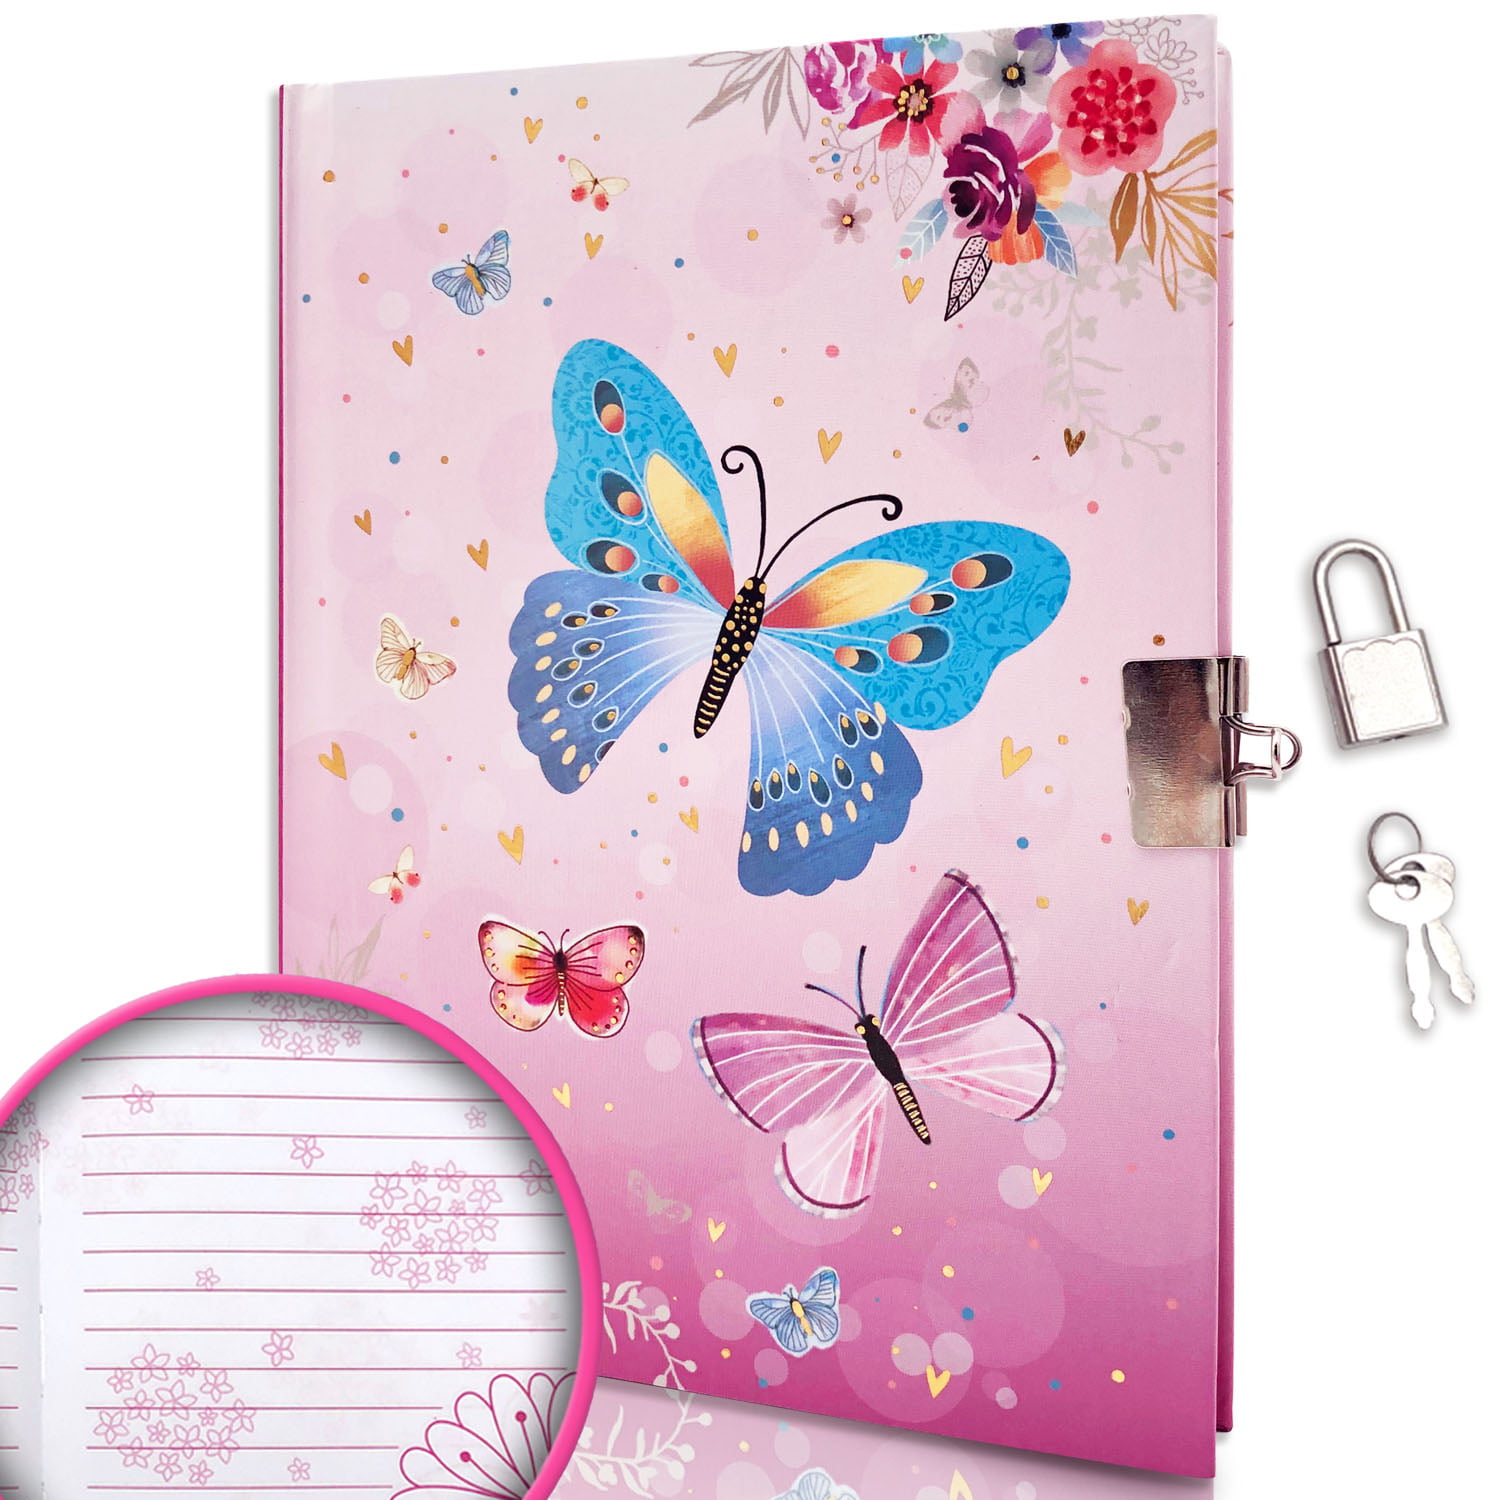 With Lock Journals Diary For Girls Kids Cartoon Diary for Decor Girls  Children